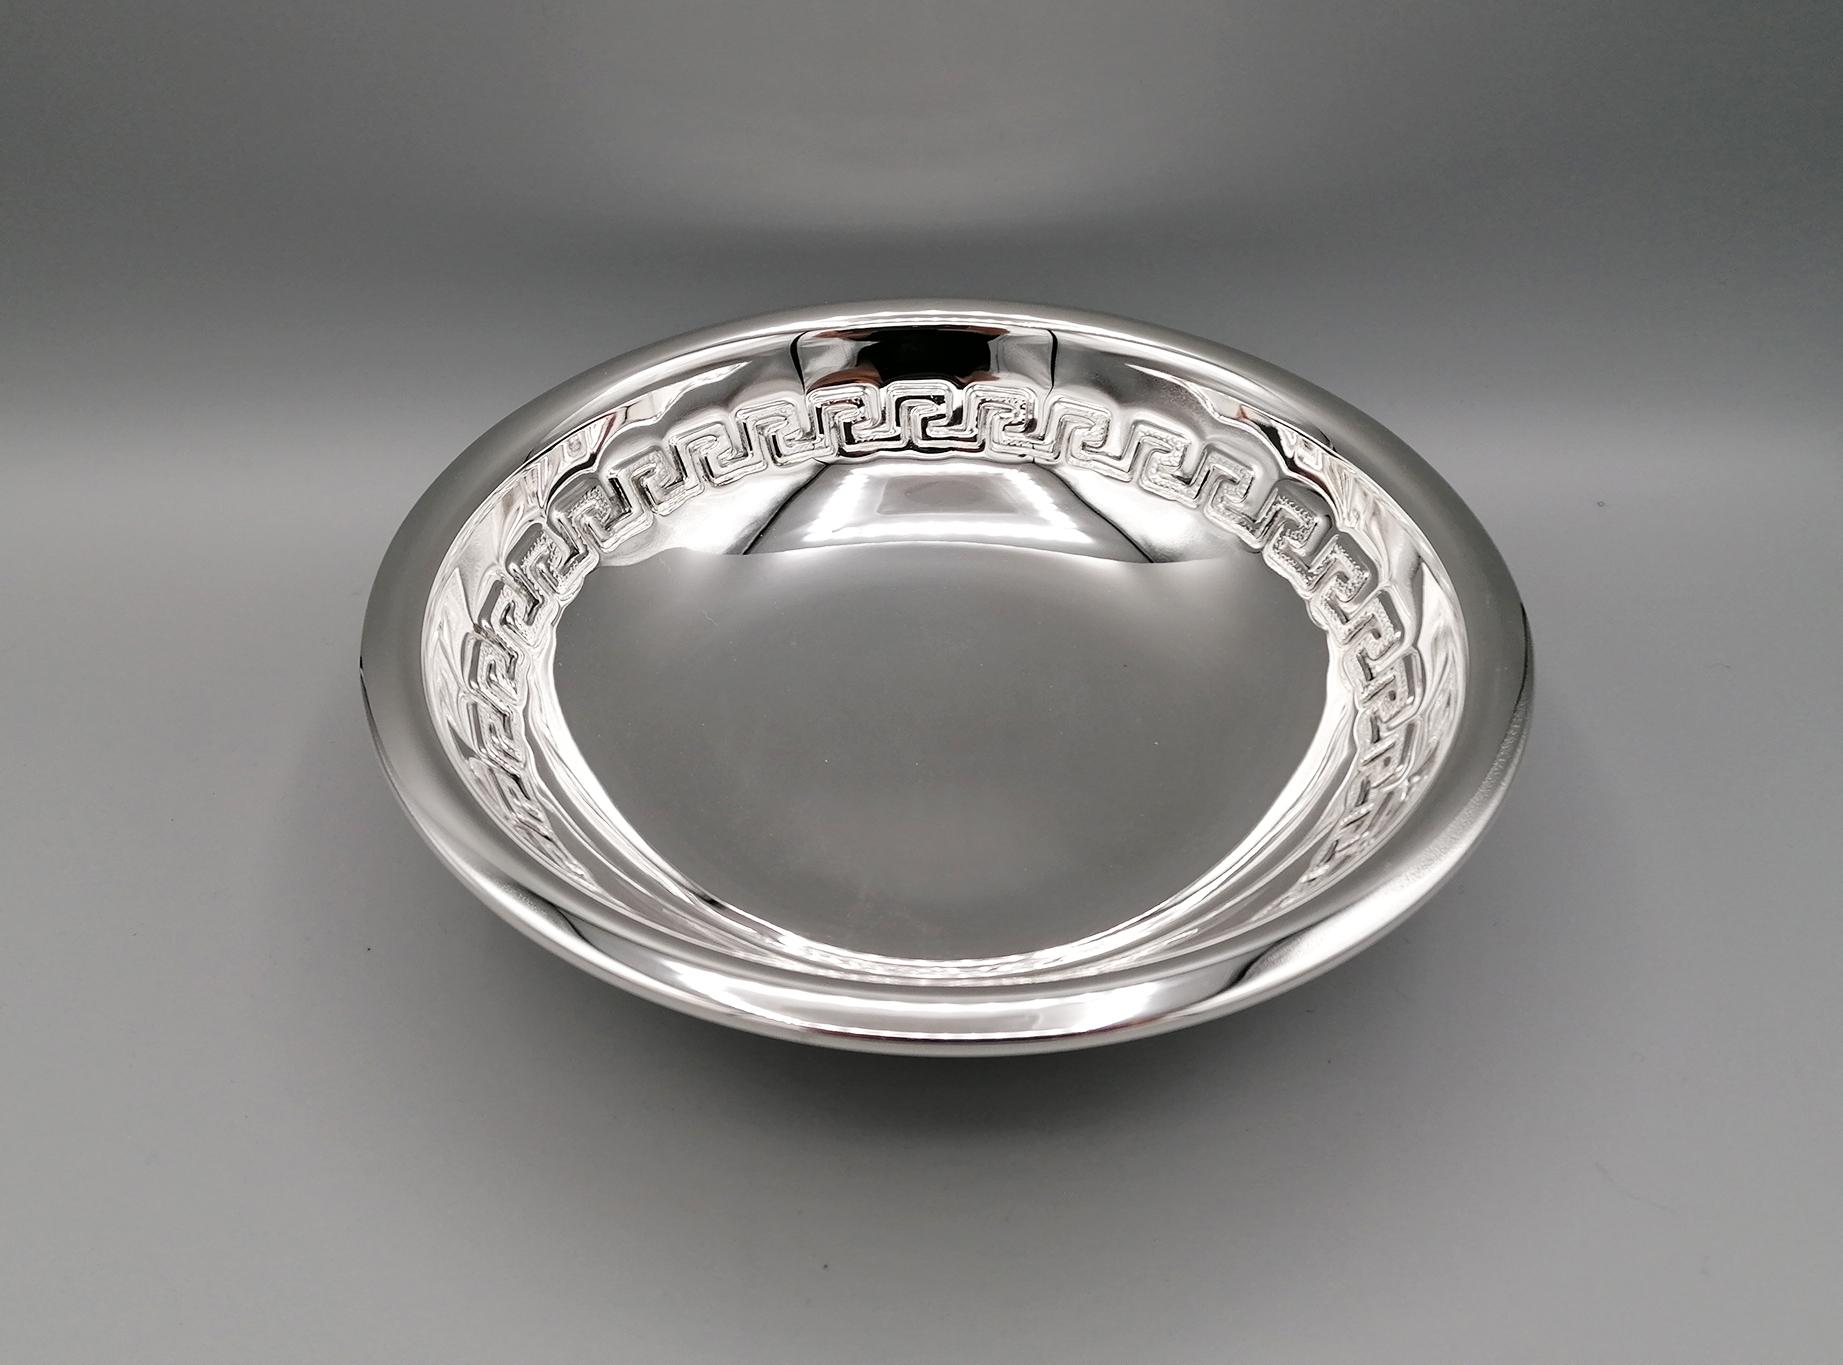 Double chamber solid 800 silver bowl. The internal workmanship is chiseled in neoclassical style, while the external part is completely smooth. A smooth round base has been welded under the bowl to streamline its shape.
Italian silverware, already